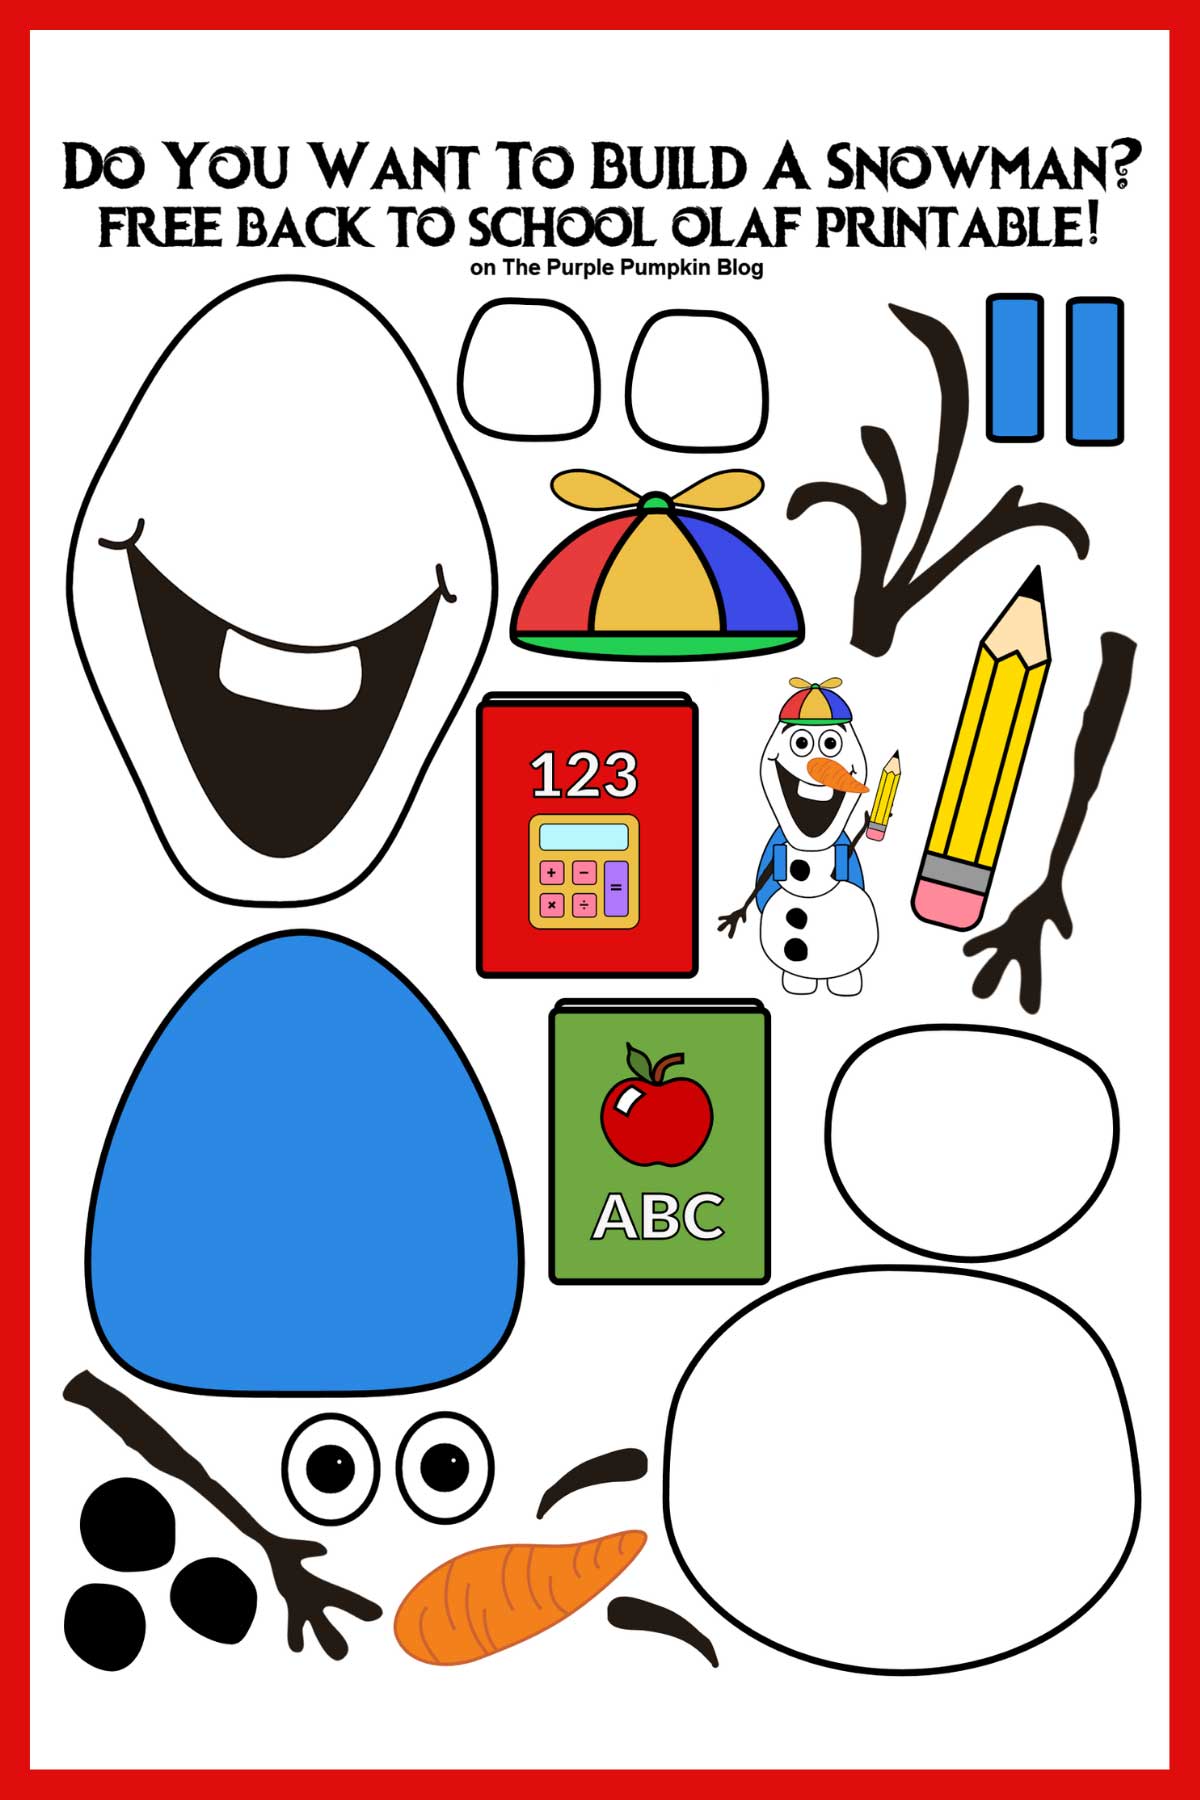 Do-You-Want-To-Build-A-Snowman—Free-Back-To-School-Olaf-Printable